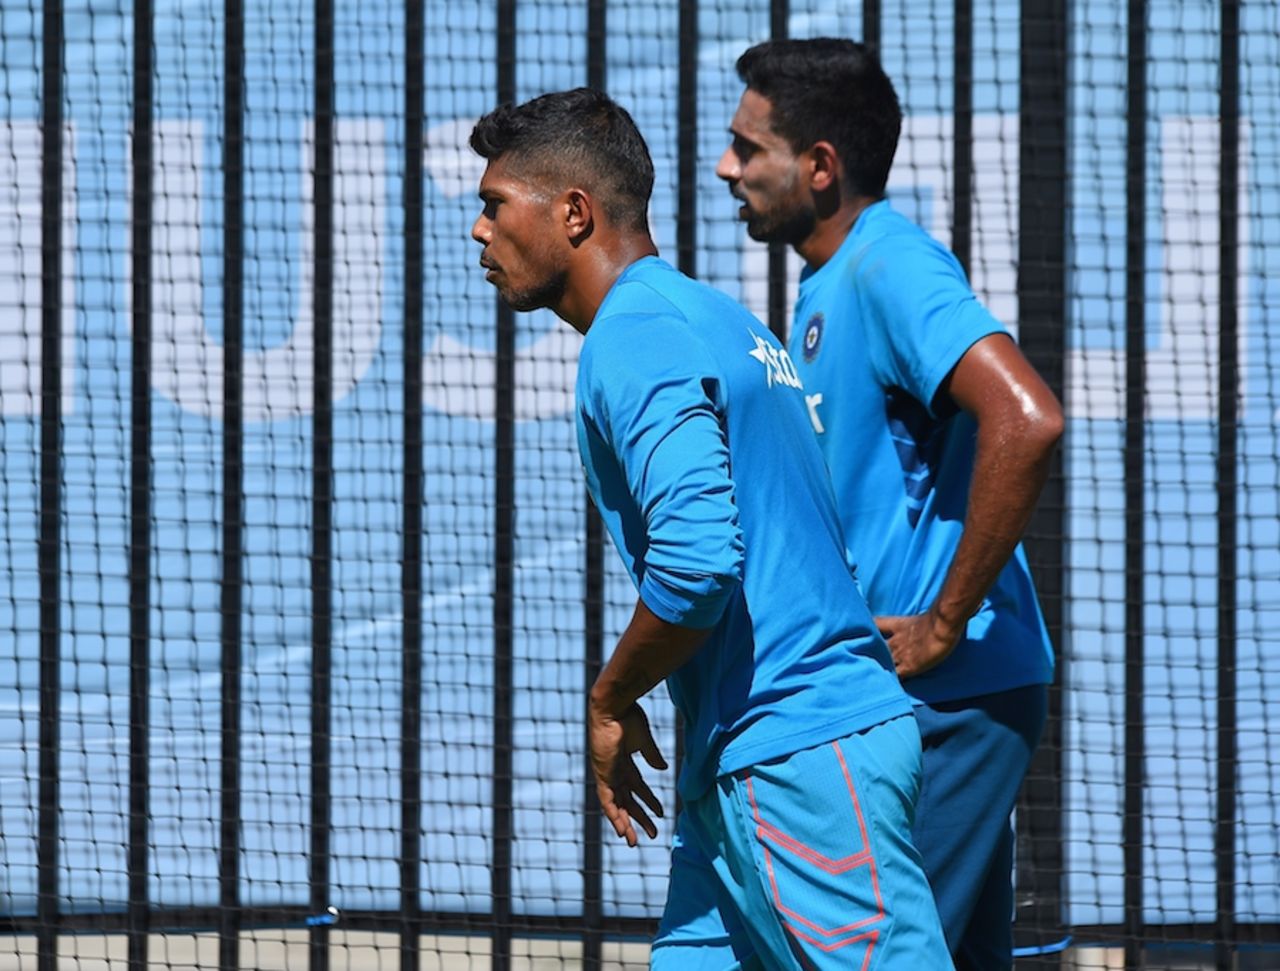 Umesh Yadav and Dhawal Kulkarni prepare to bowl in the nets, World Cup 2015, Perth, March 5, 2015